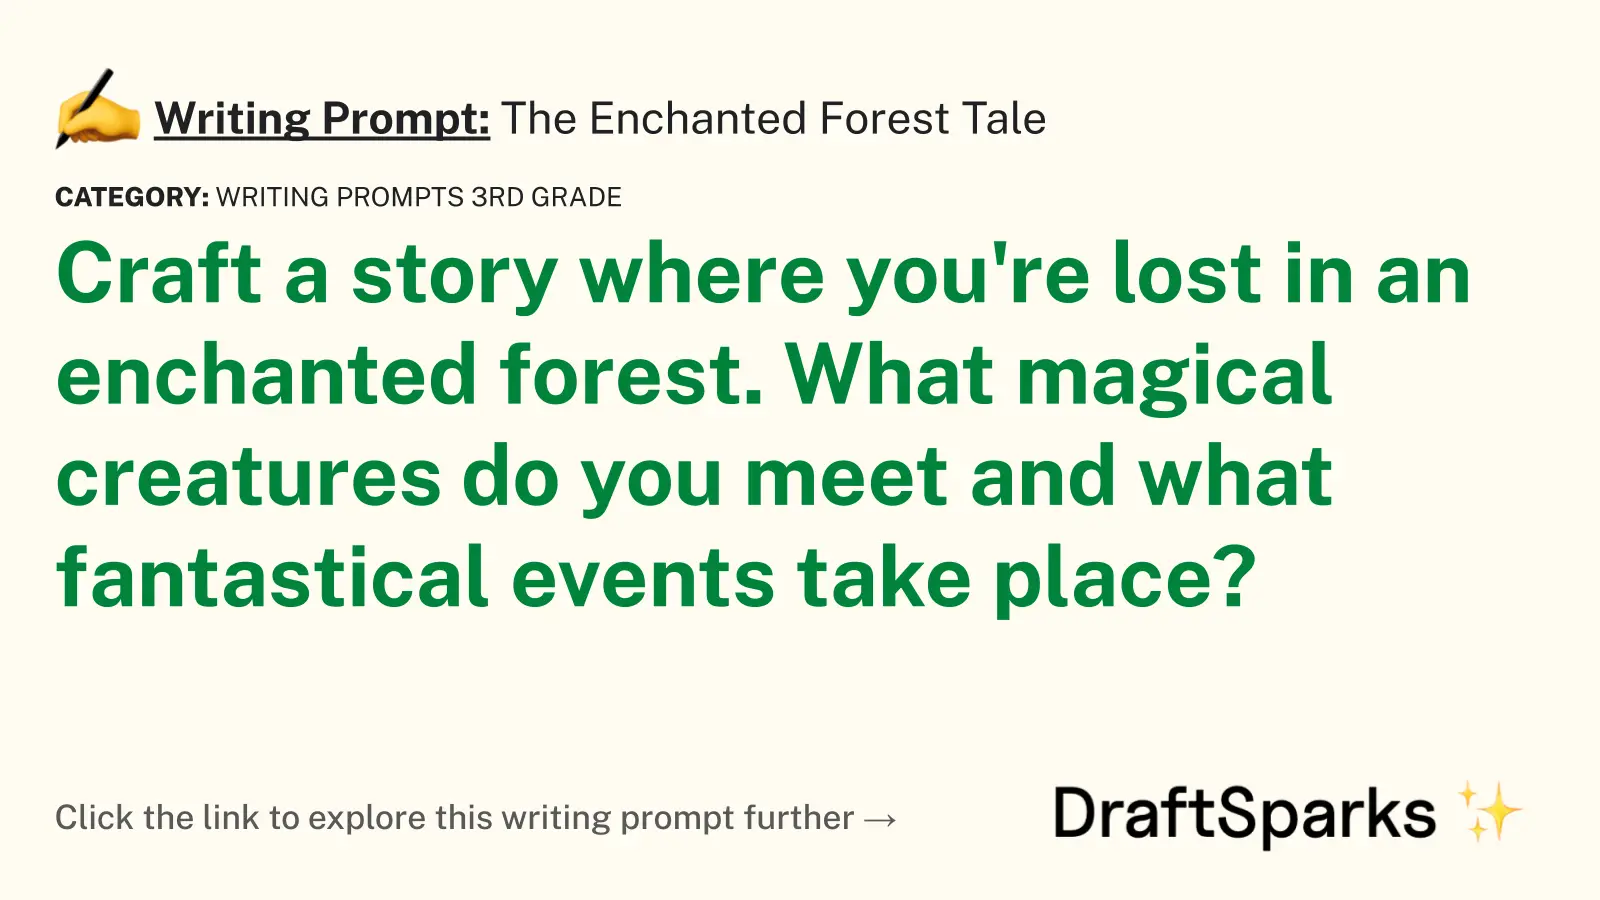 The Enchanted Forest Tale